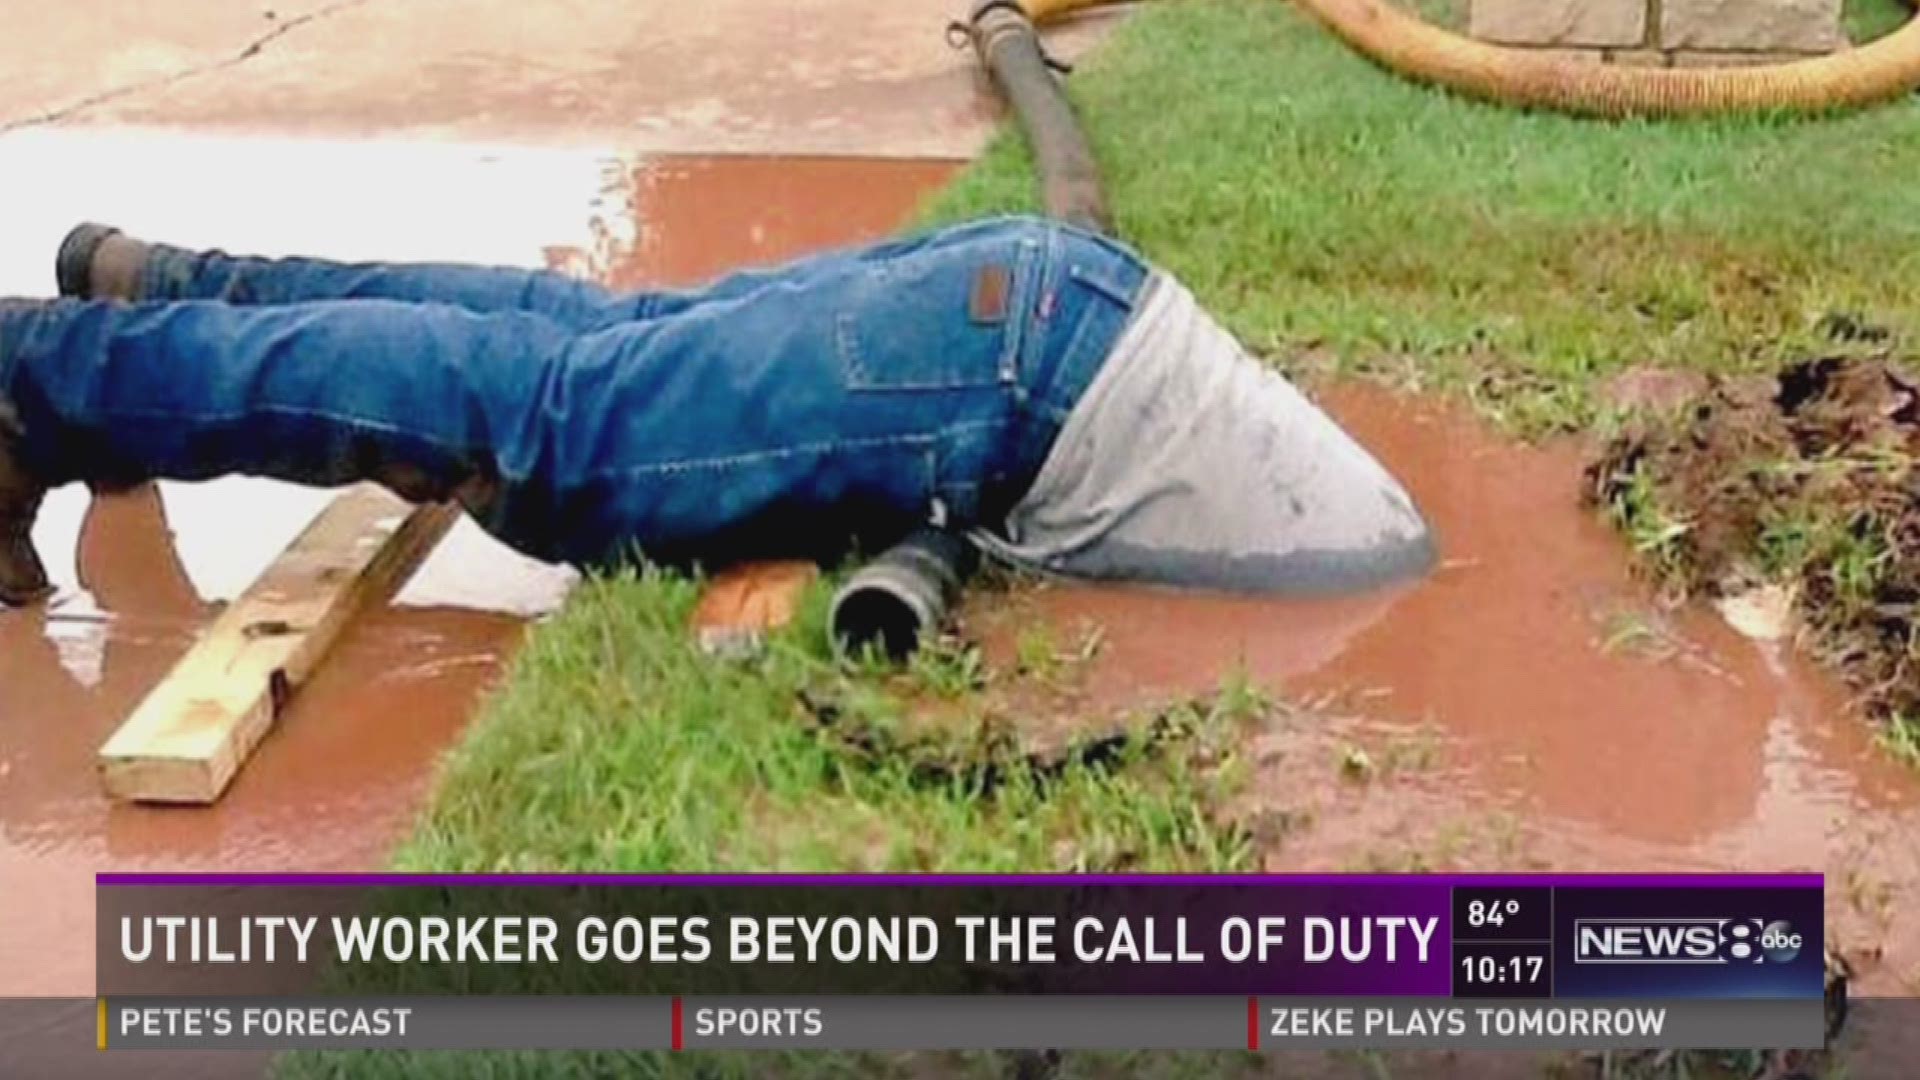 A utility worker goes beyond the call of duty